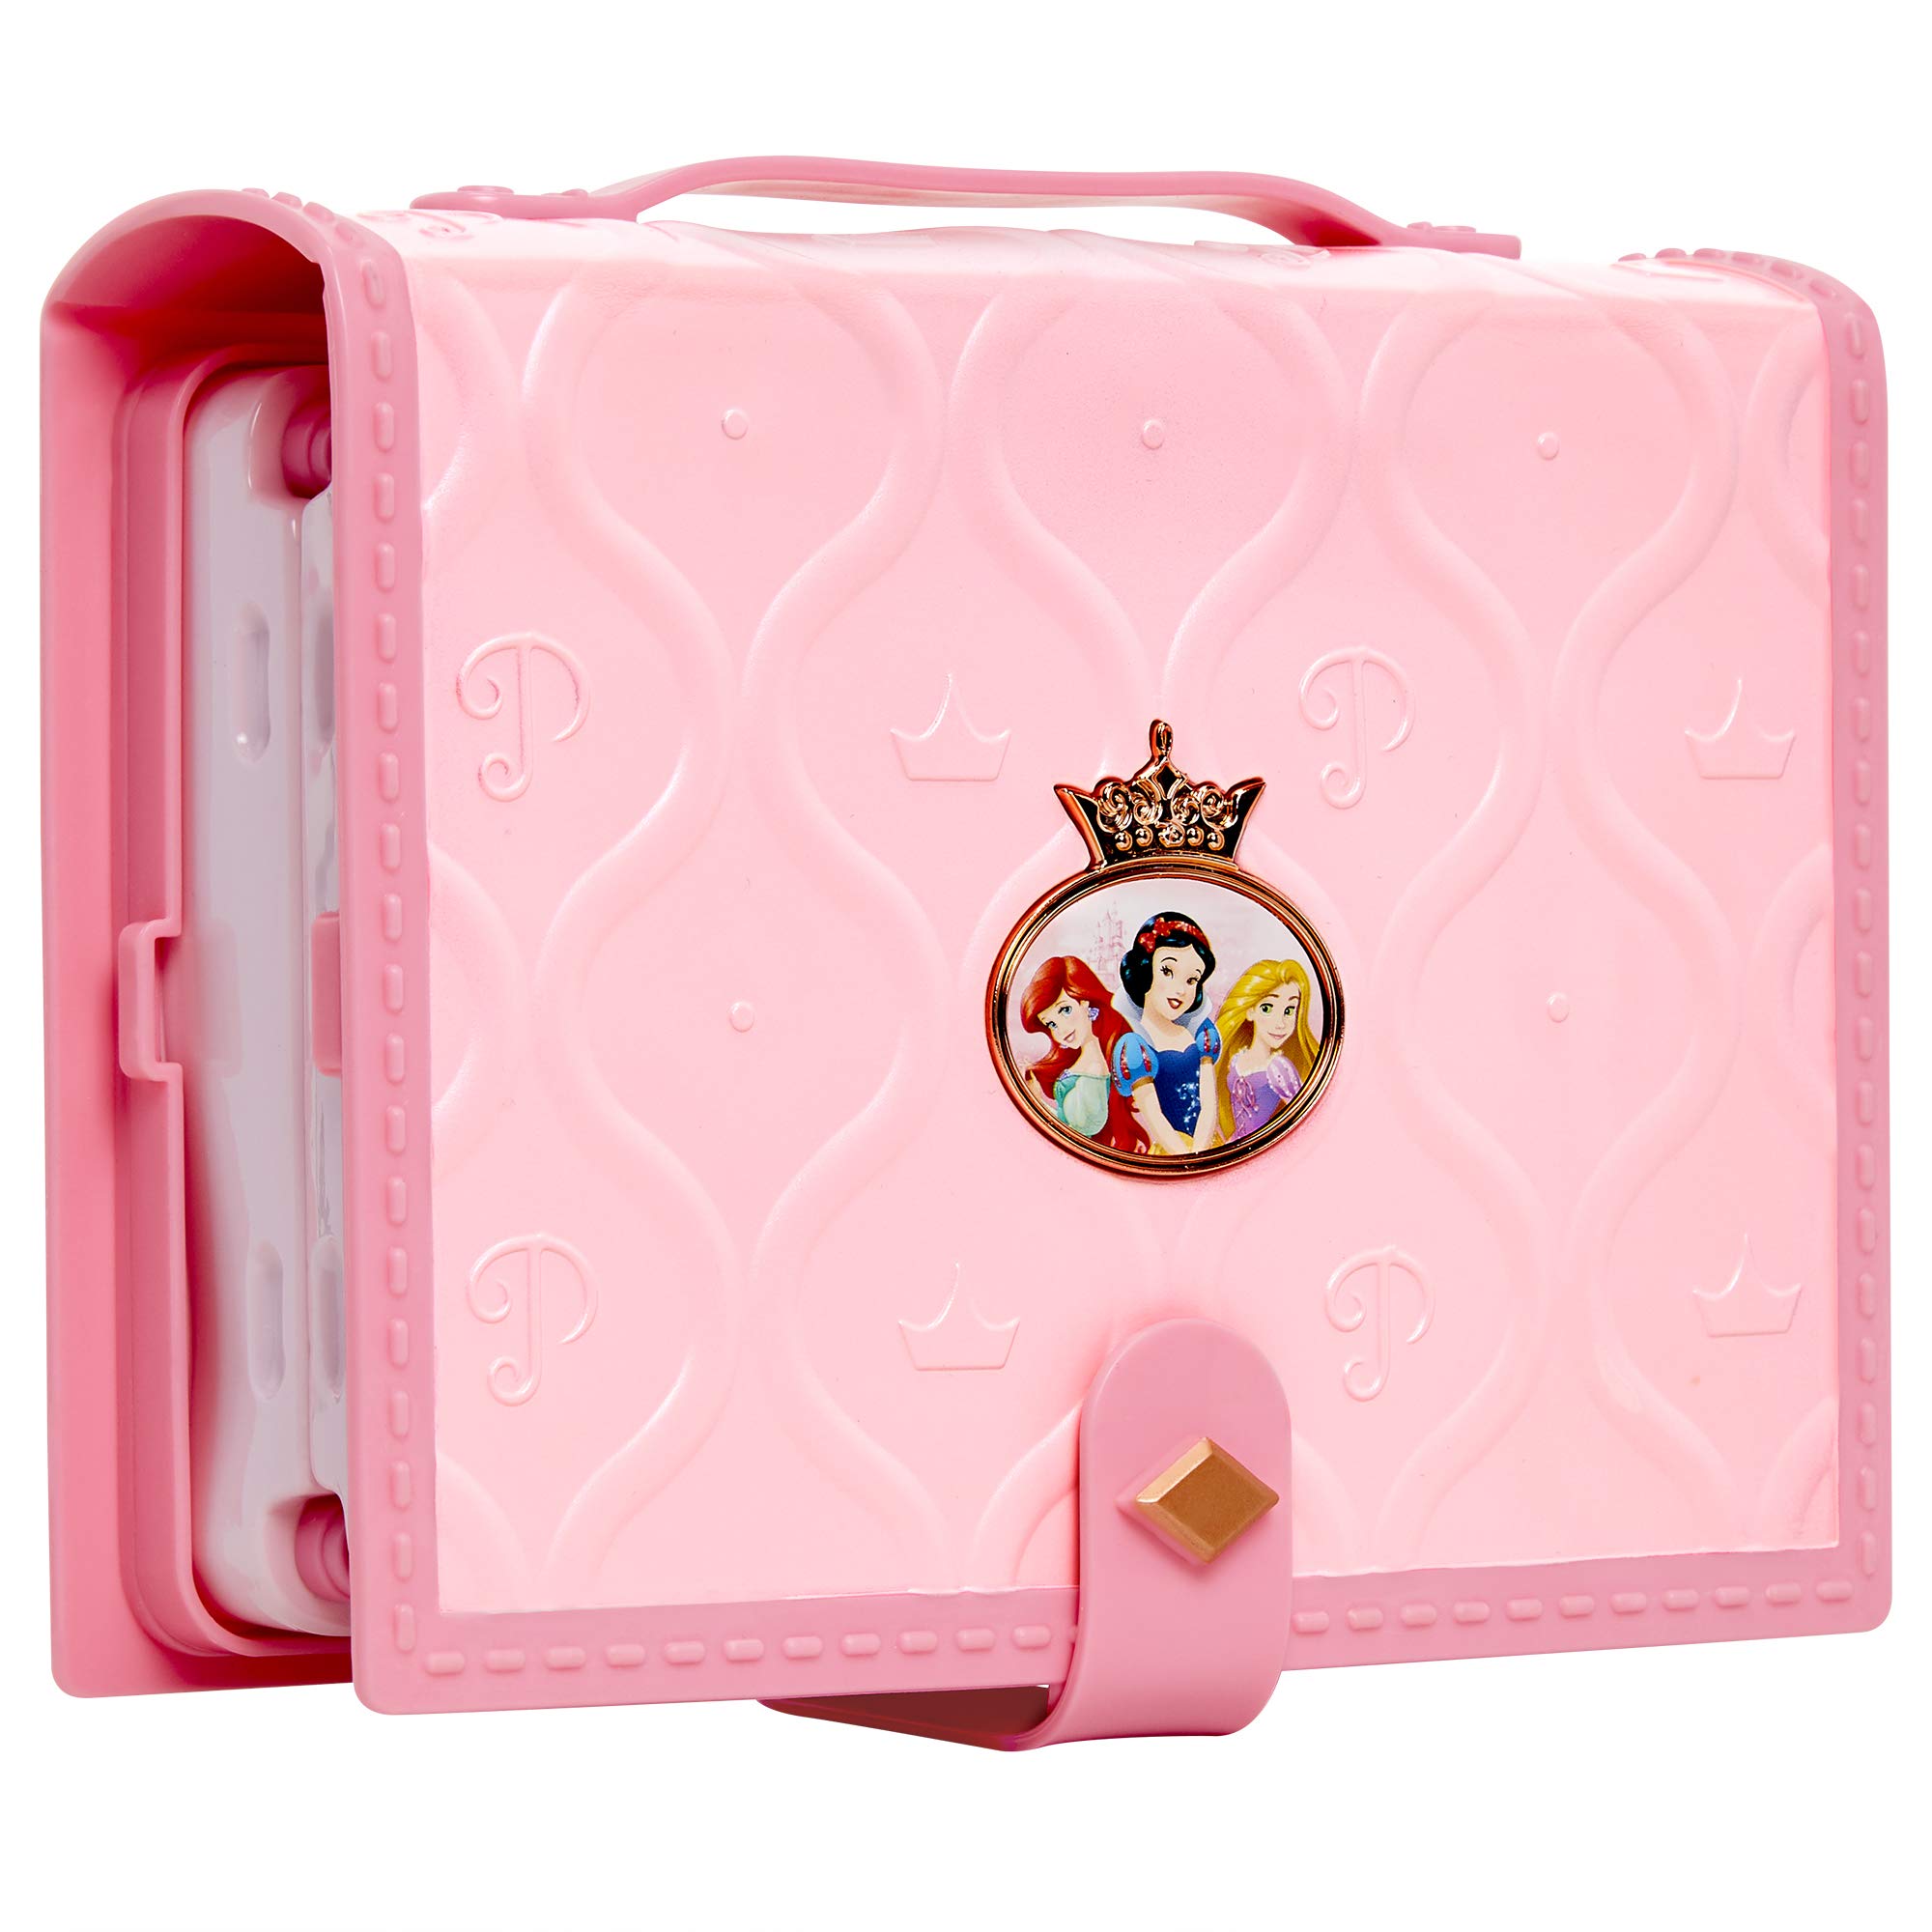 Disney Princess Style Collection - Travel Accessories Kit, Pink